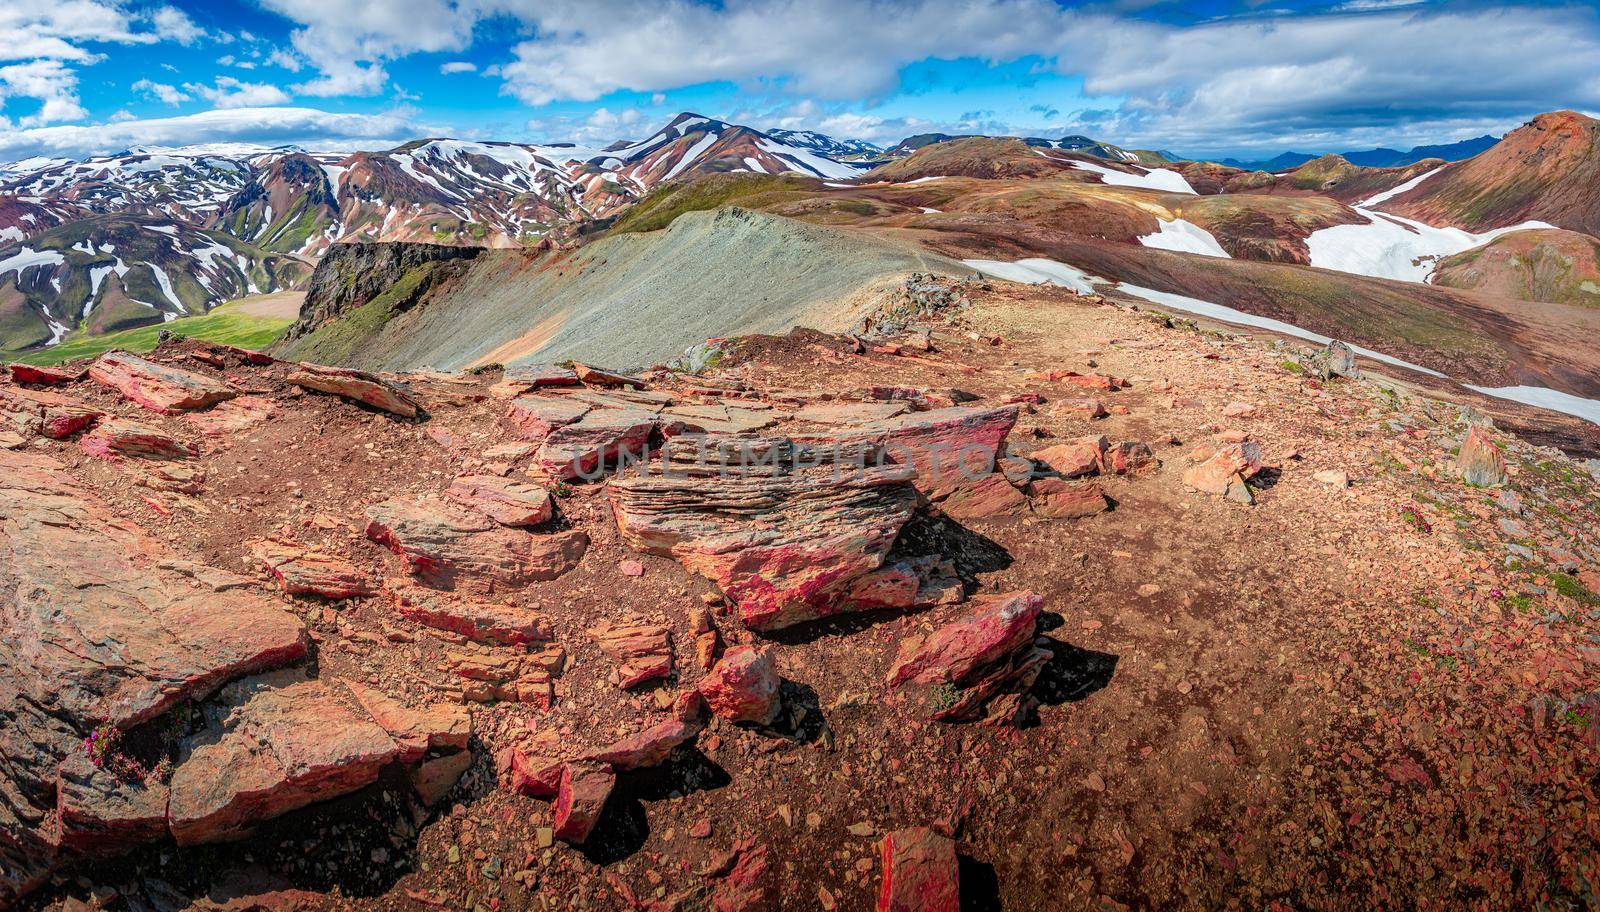 Panoramic landscape view of colorful rainbow volcanic Landmannalaugar mountains and famous Laugavegur hiking trail, with dramatic sky and snow in Iceland